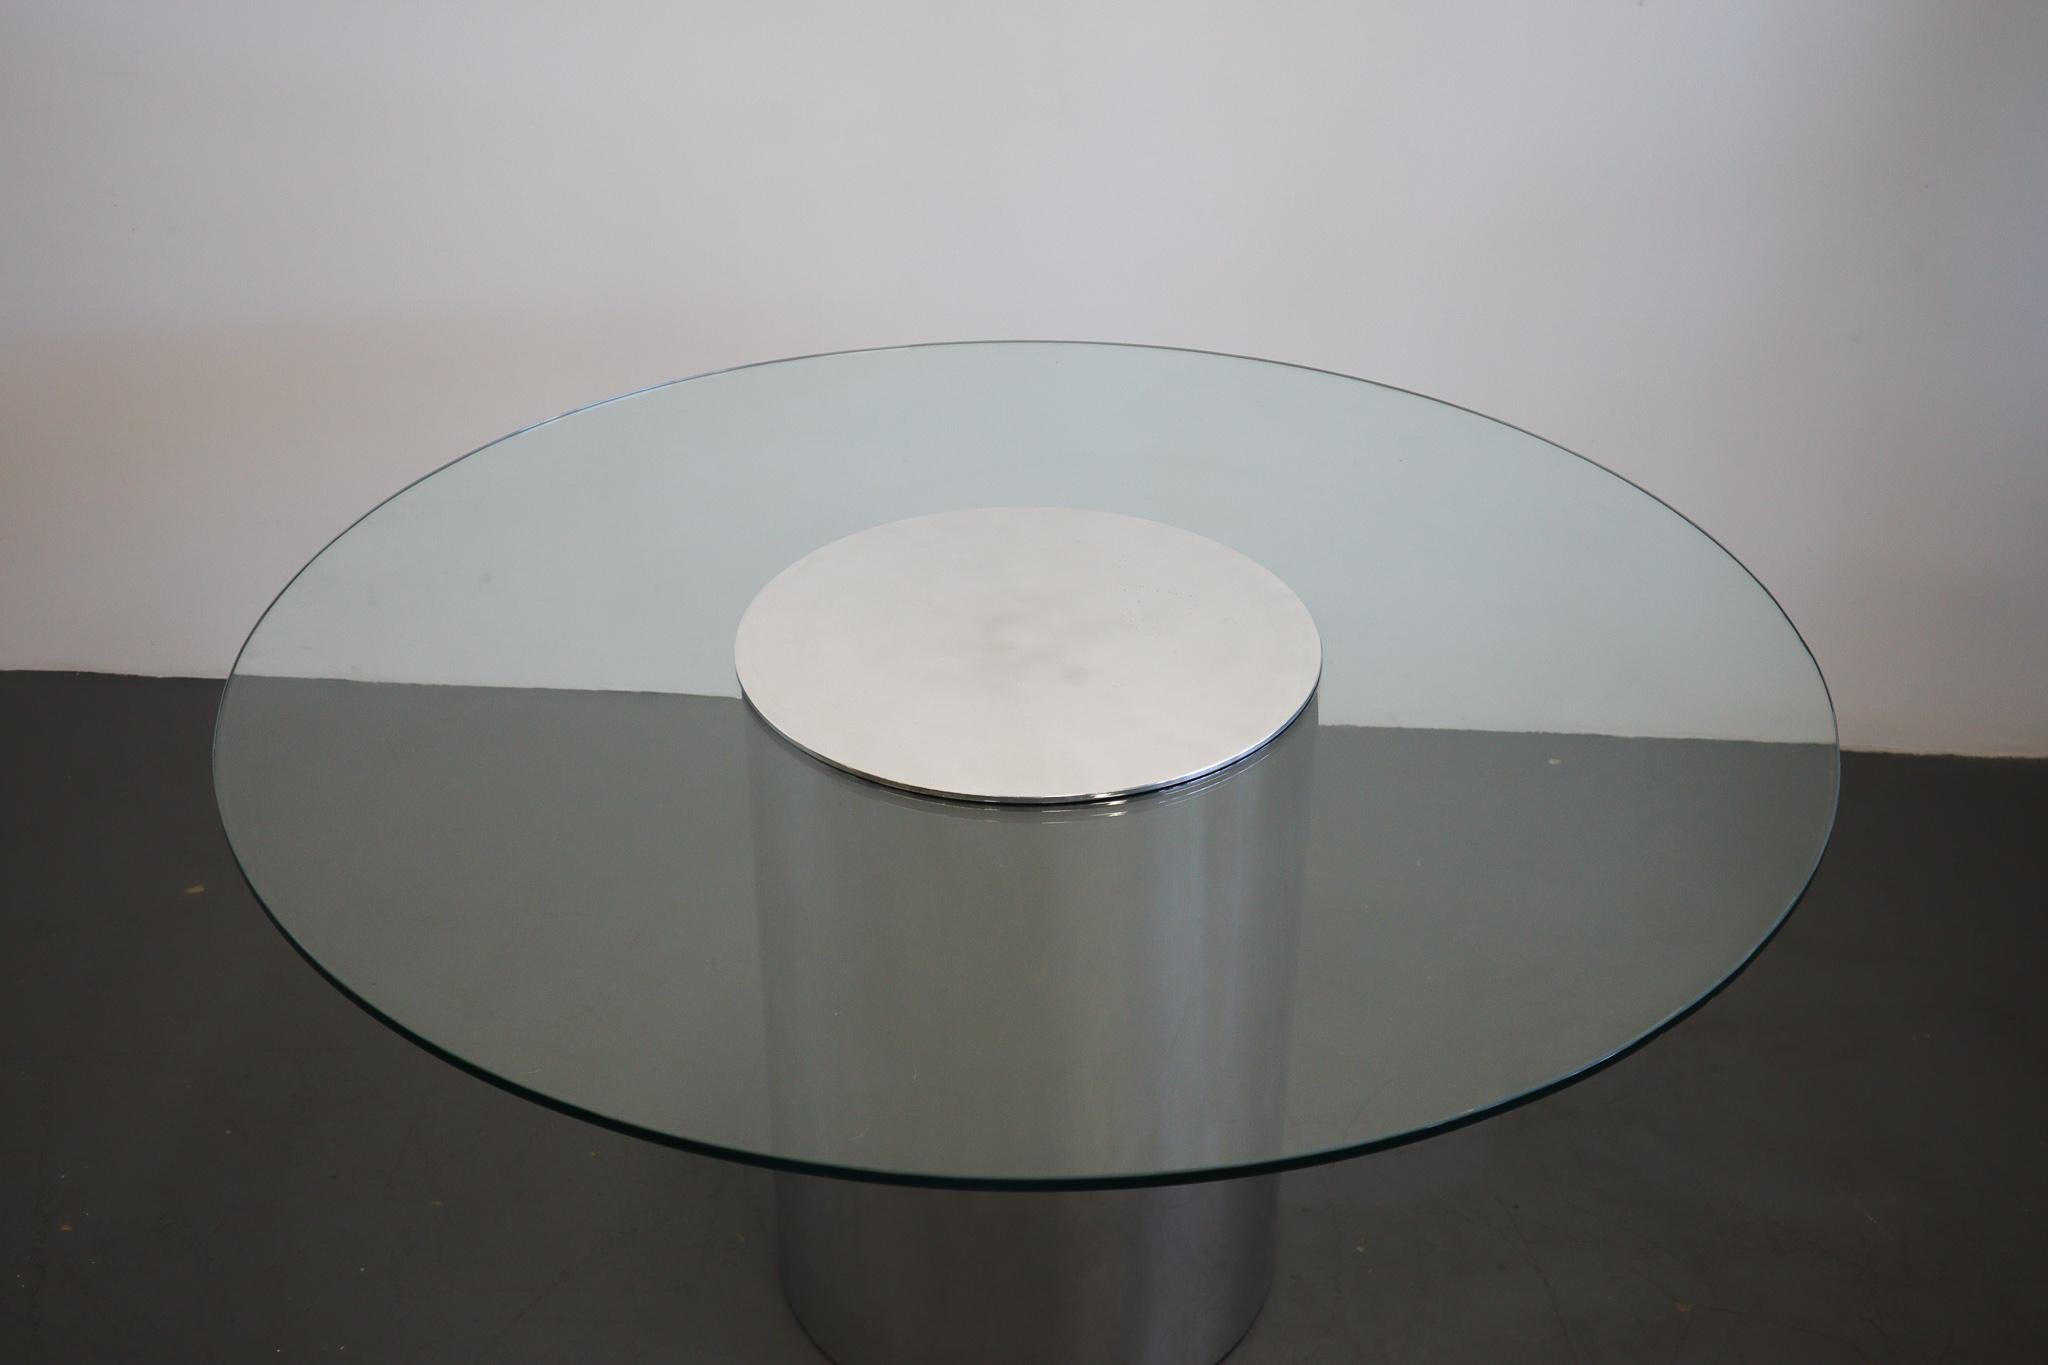 Stunning aluminum base with a delicately placed solid aluminum center piece. Recently polished to give it a clean mirror finish. Paul Mayen was a Spanish architect and industrial designer known for his work at Frank Lloyd Wrights Fallingwater. His